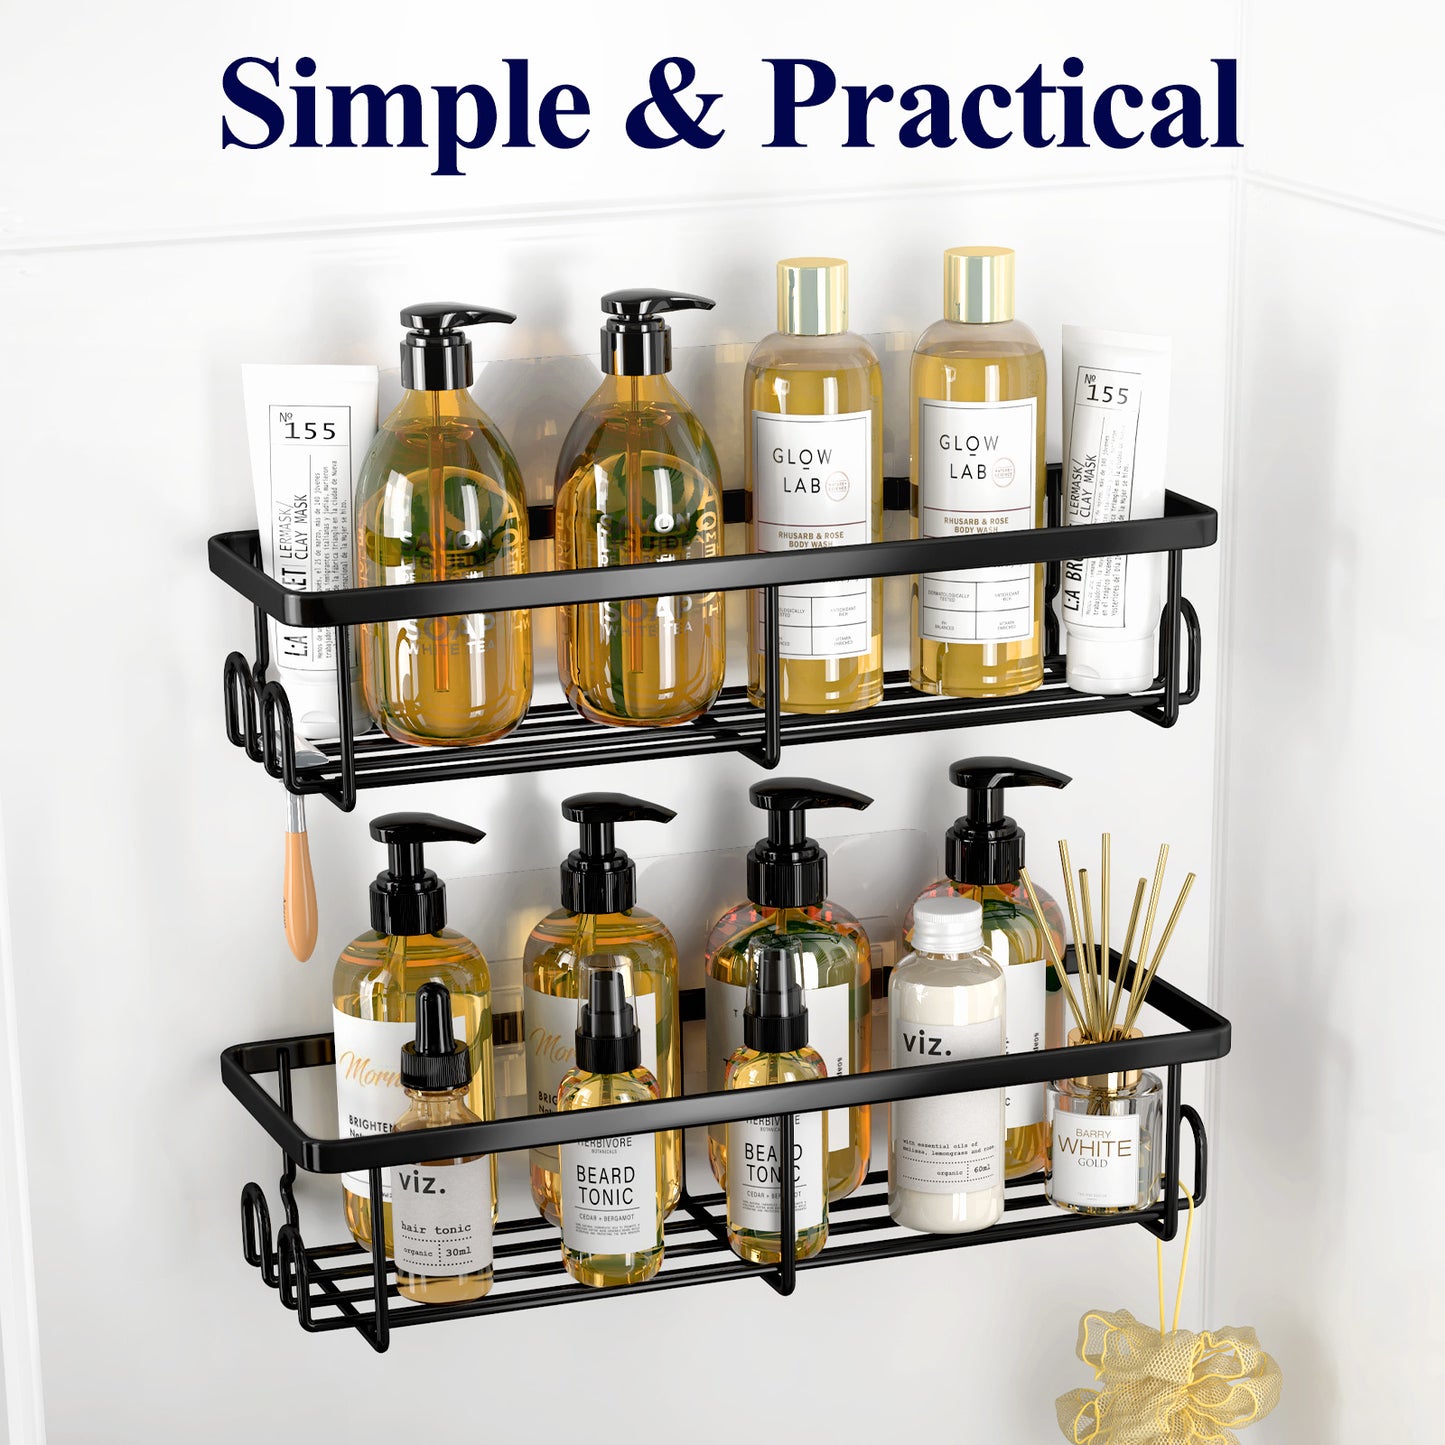 Kitsure Shower Caddy - 2 Pack Rustproof Shower Organizer, Drill-Free & Quick-Dry Shower Shelves for inside Shower with Large Capacity, Durable Stainless Steel Shower Rack with 4 Hooks, Black (4167)